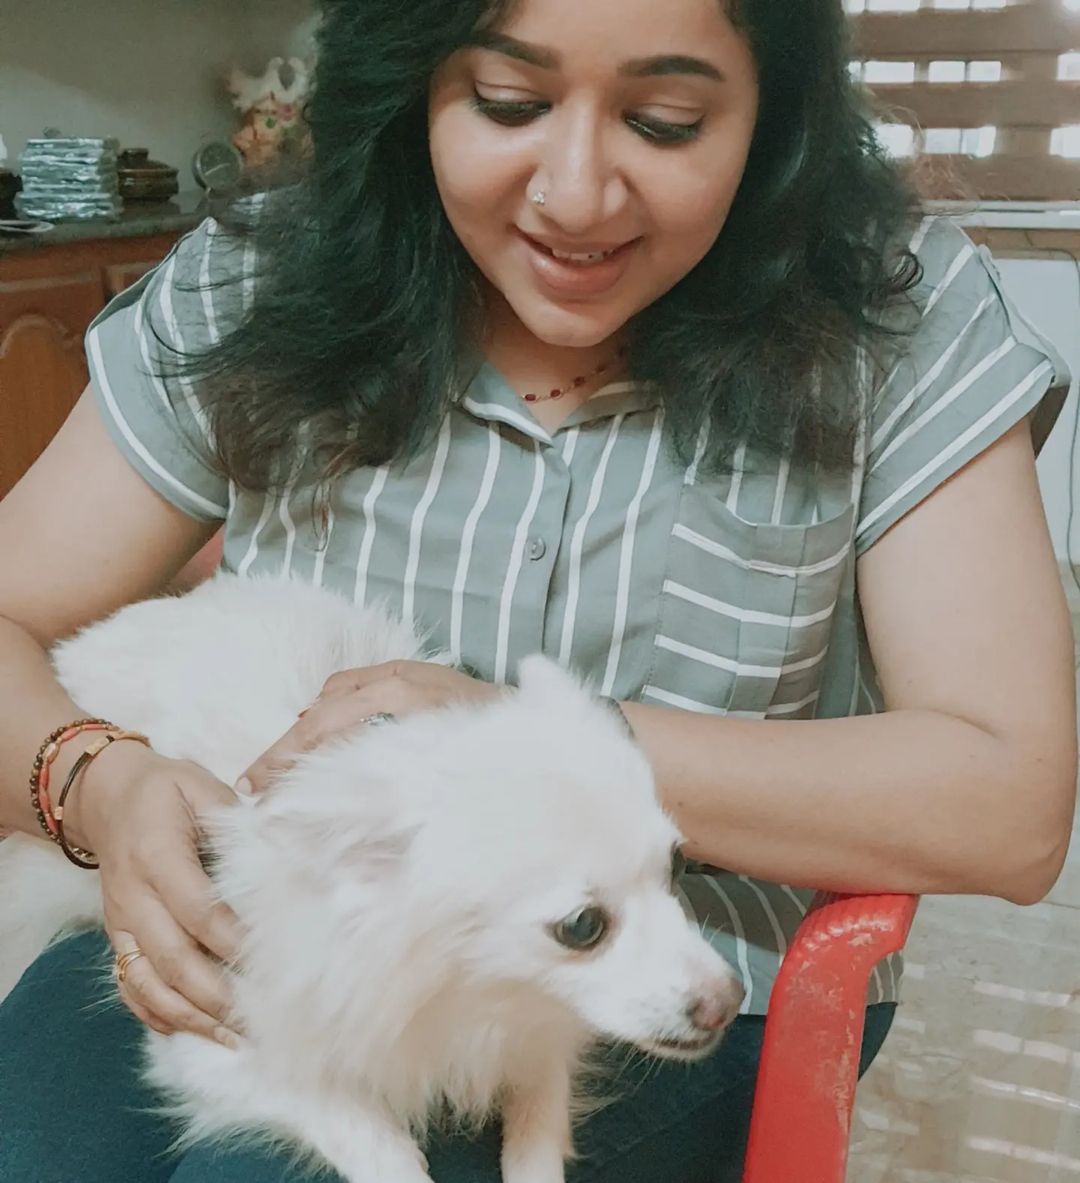 Chandra Lakshman with a white puppy